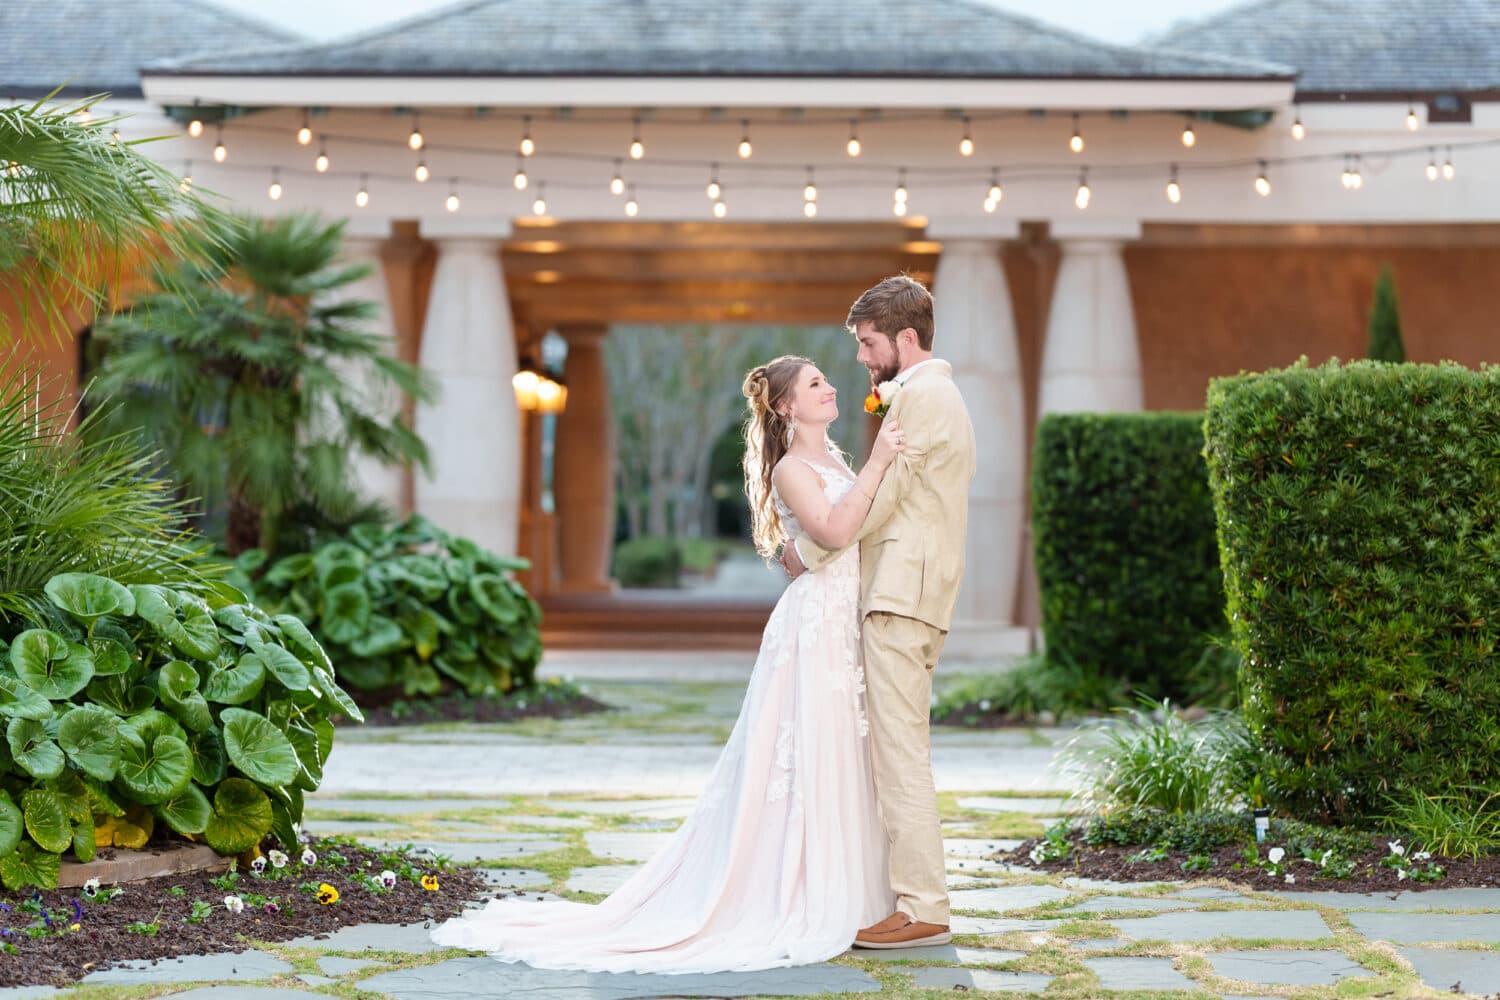 Bride and groom in the courtyard at dusk under the lights - 21 Main Events - North Myrtle Beach